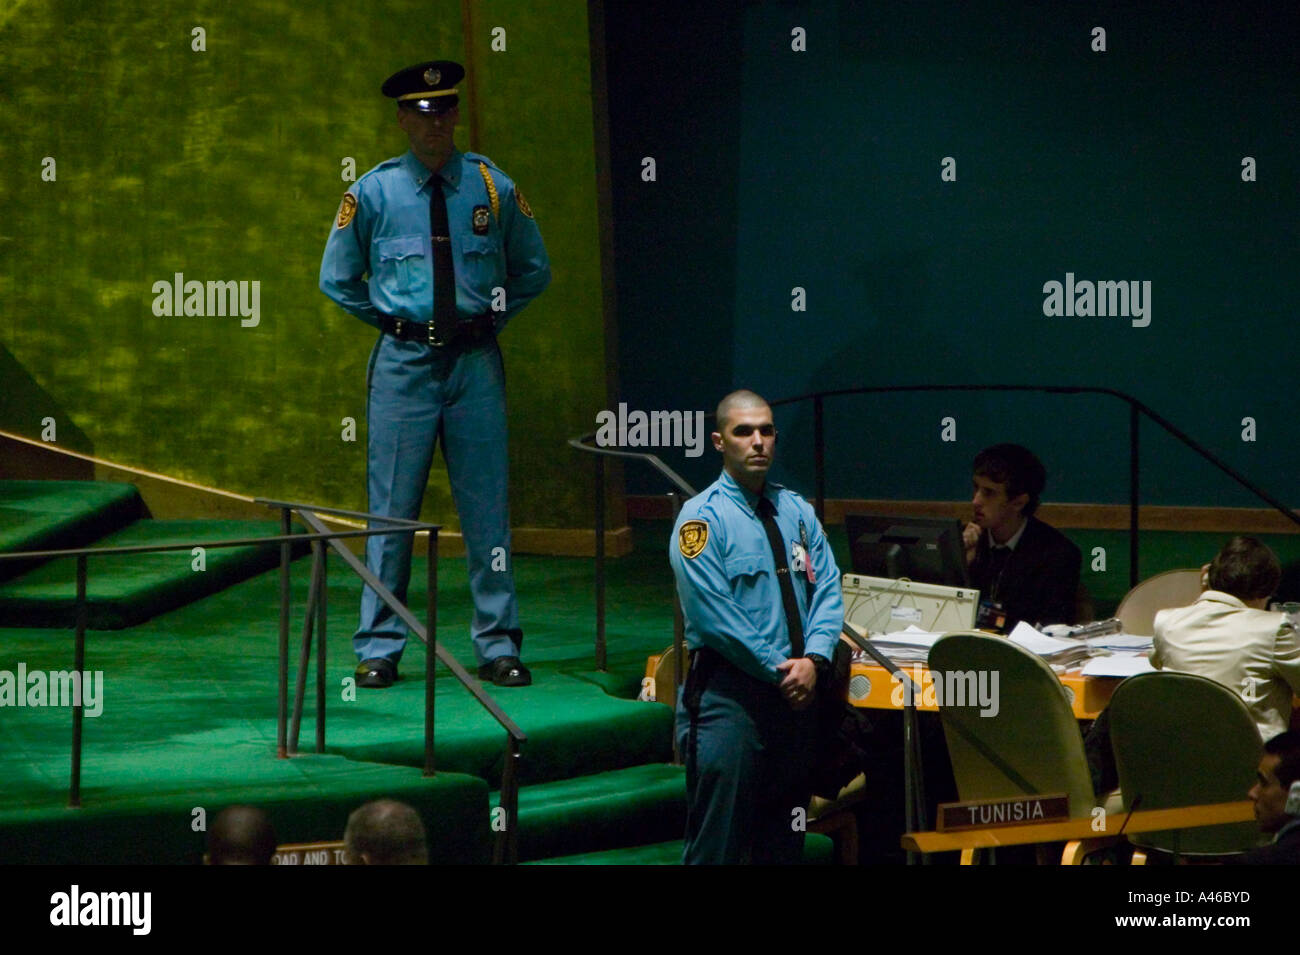 Security guards stand near podium in general assembly hall at United Nations headquarters in New York USA September 2005 Stock Photo